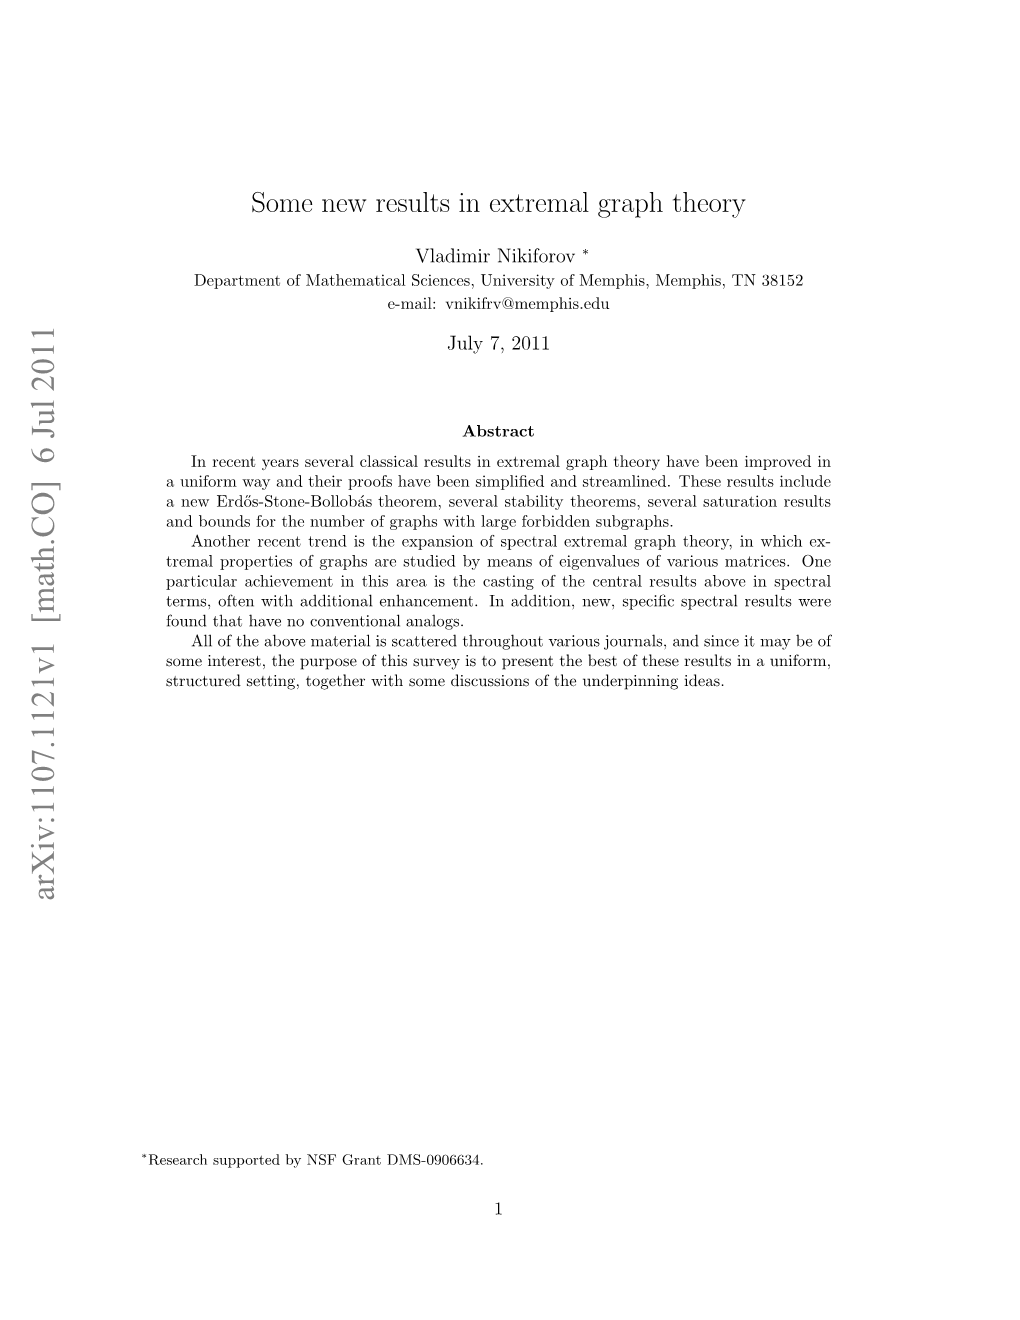 Some New Results in Extremal Graph Theory